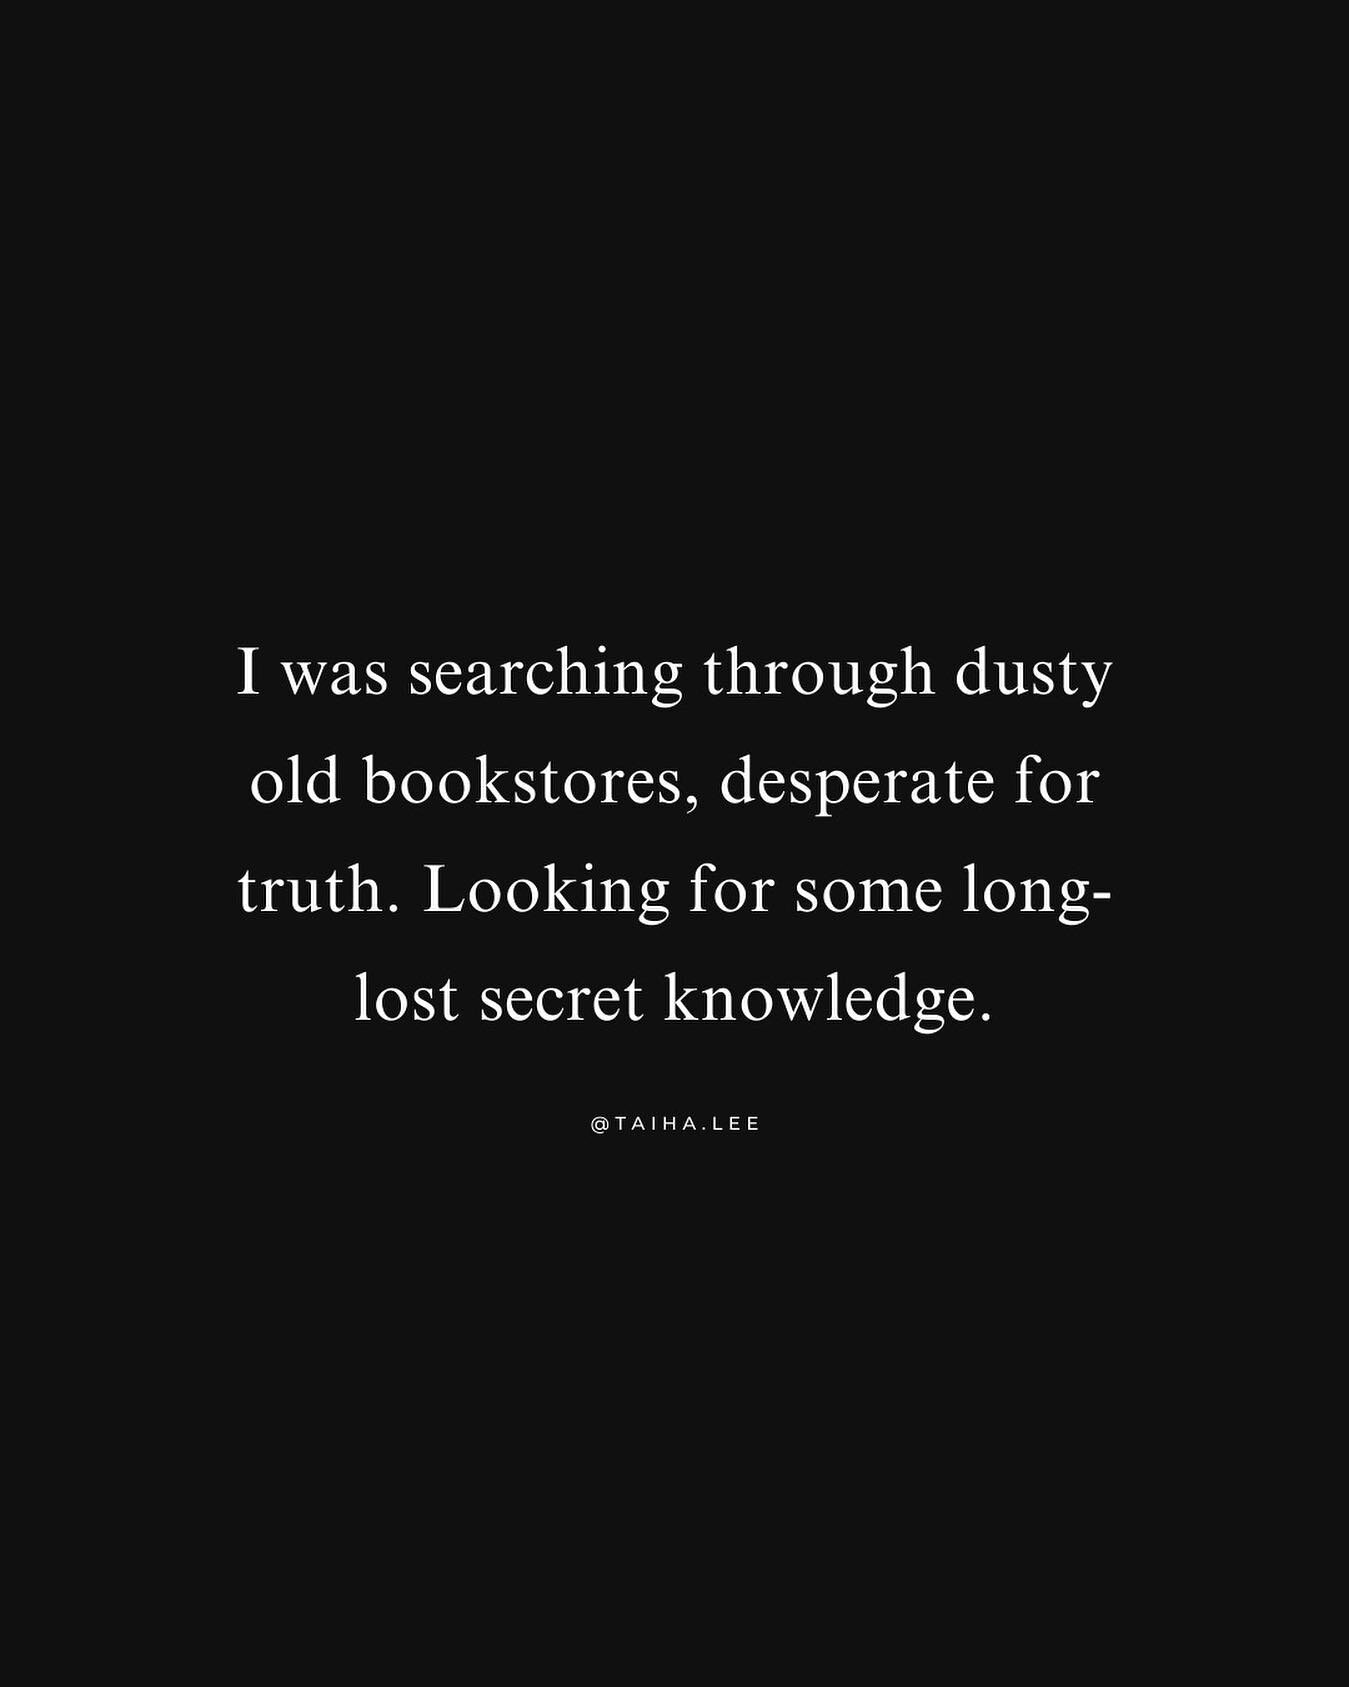 I was searching through dusty old bookstores, desperate for truth. Looking for some long-lost secret knowledge.
⠀⠀⠀⠀⠀⠀⠀⠀⠀
From my book, 'Waking Up' - coming out May 22nd.